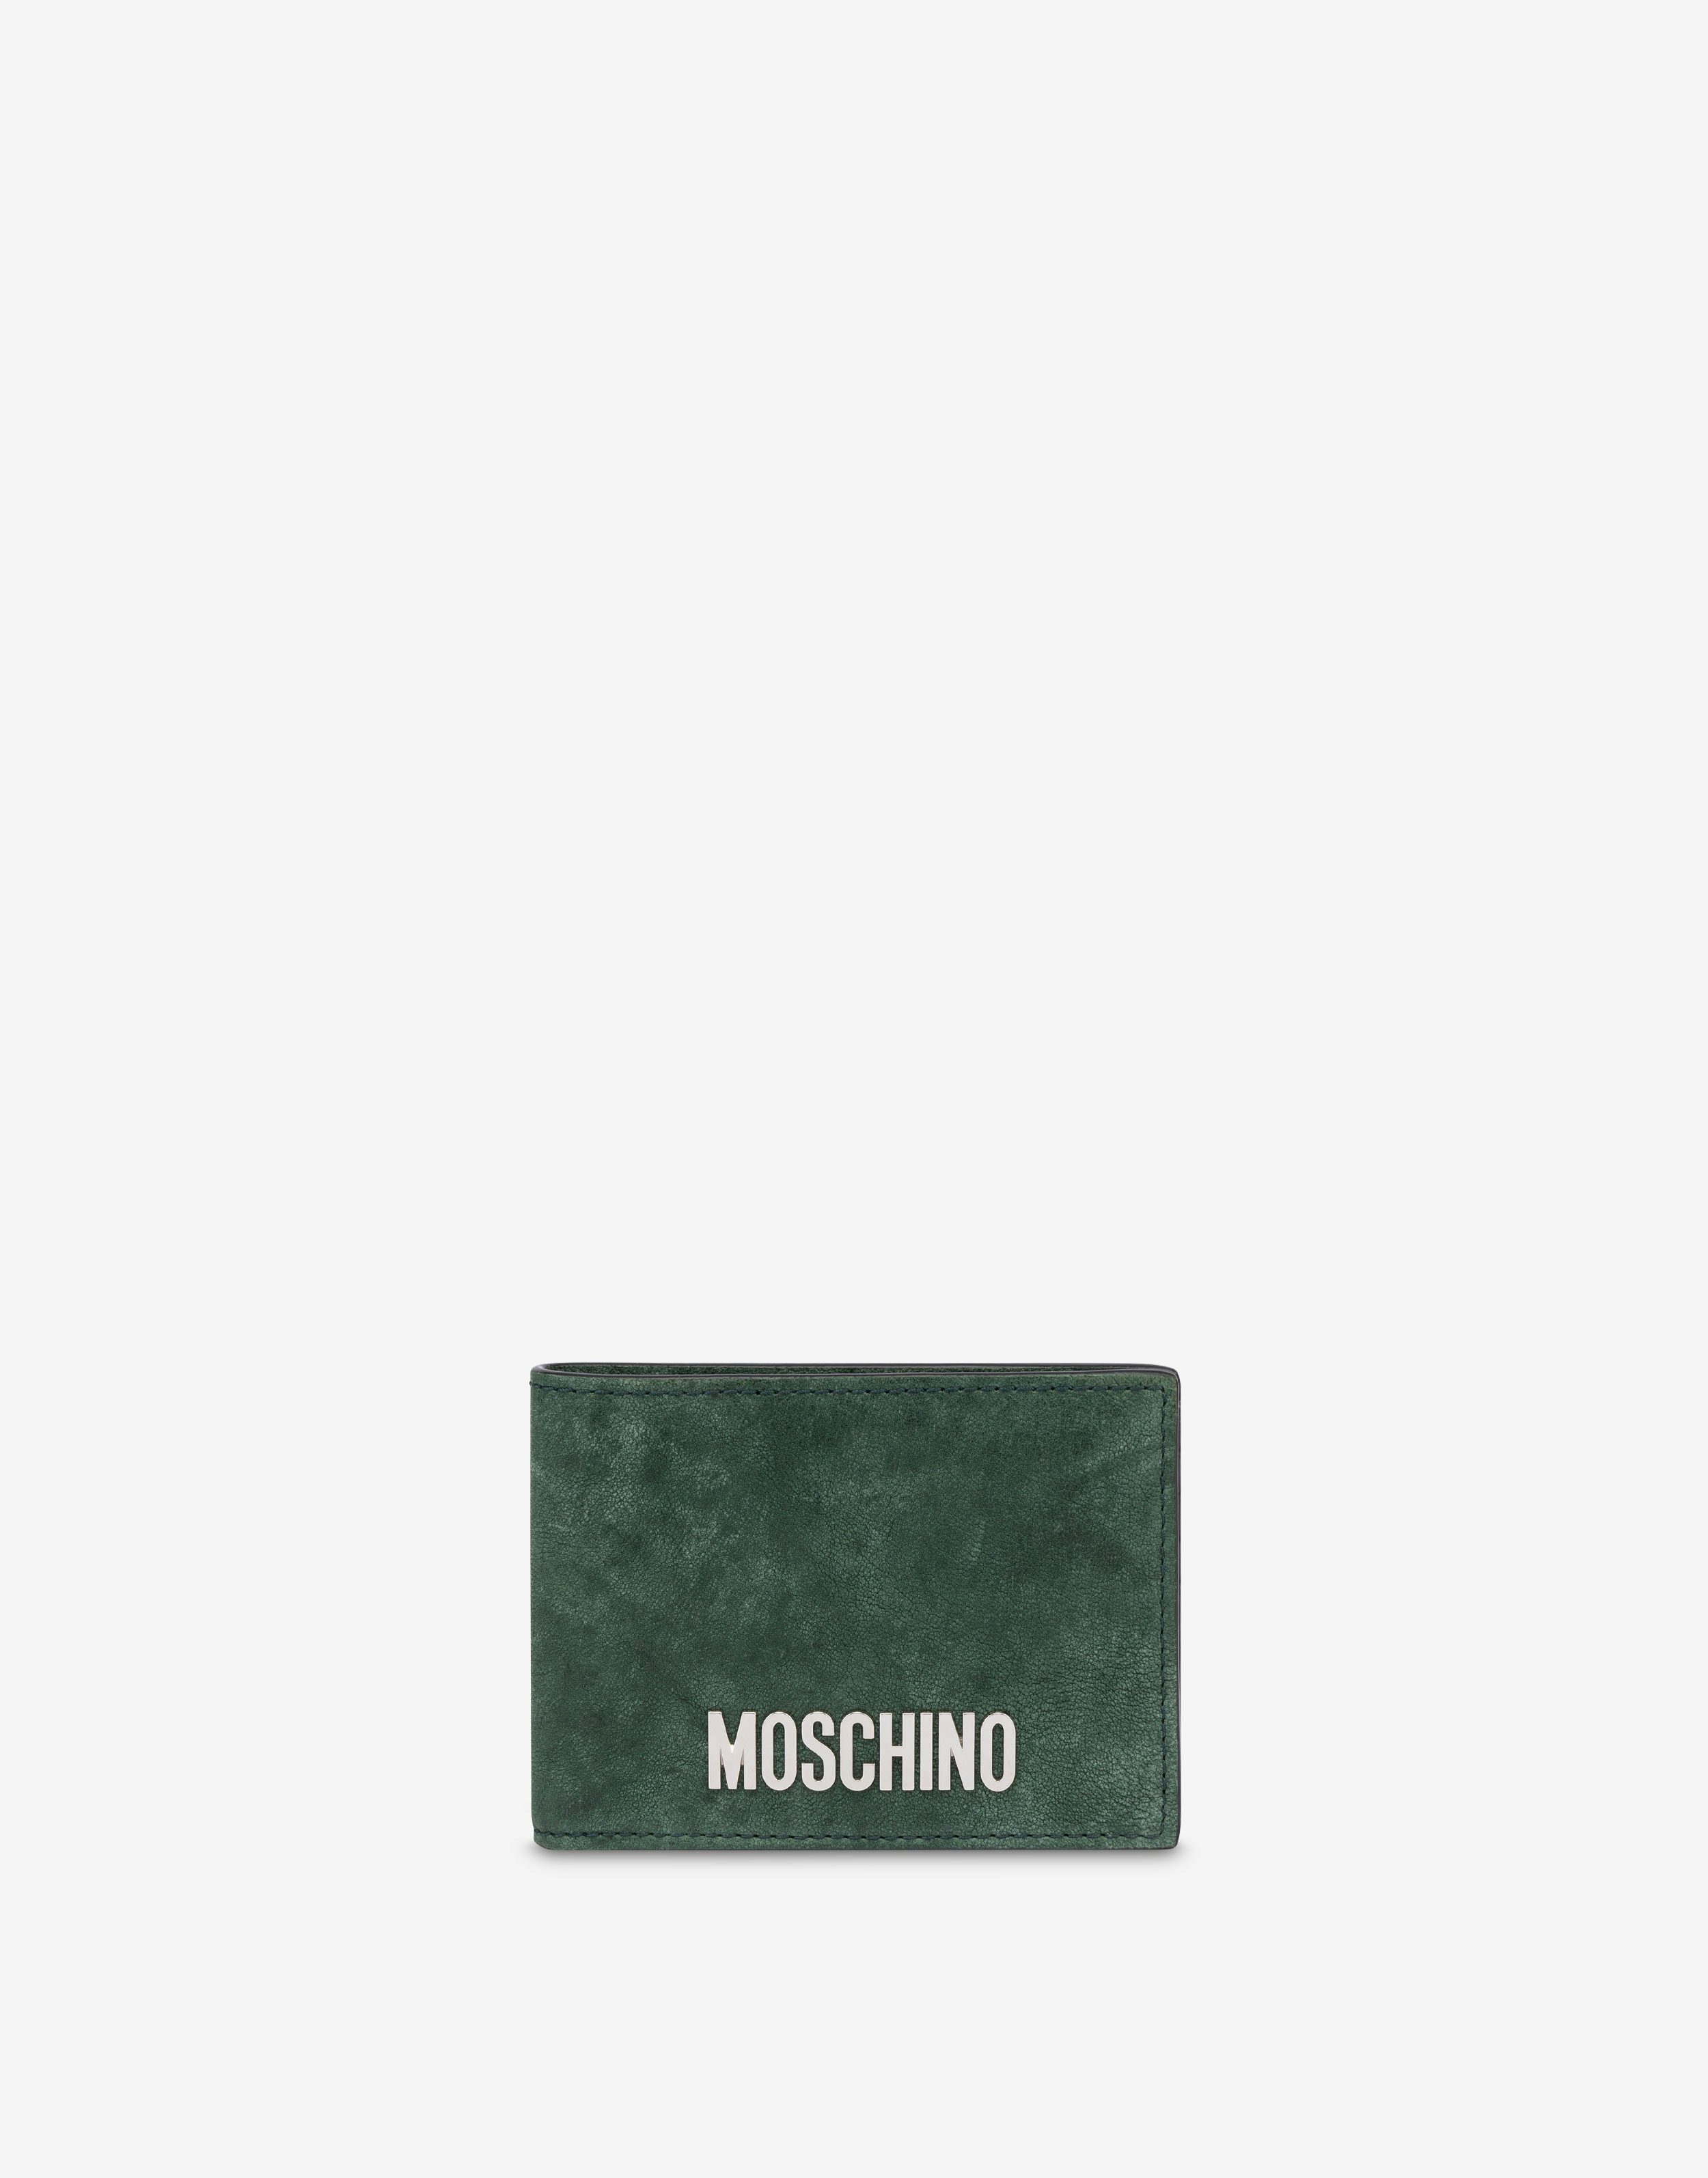 Moschino 財布・小物 for メンズ - Official Store